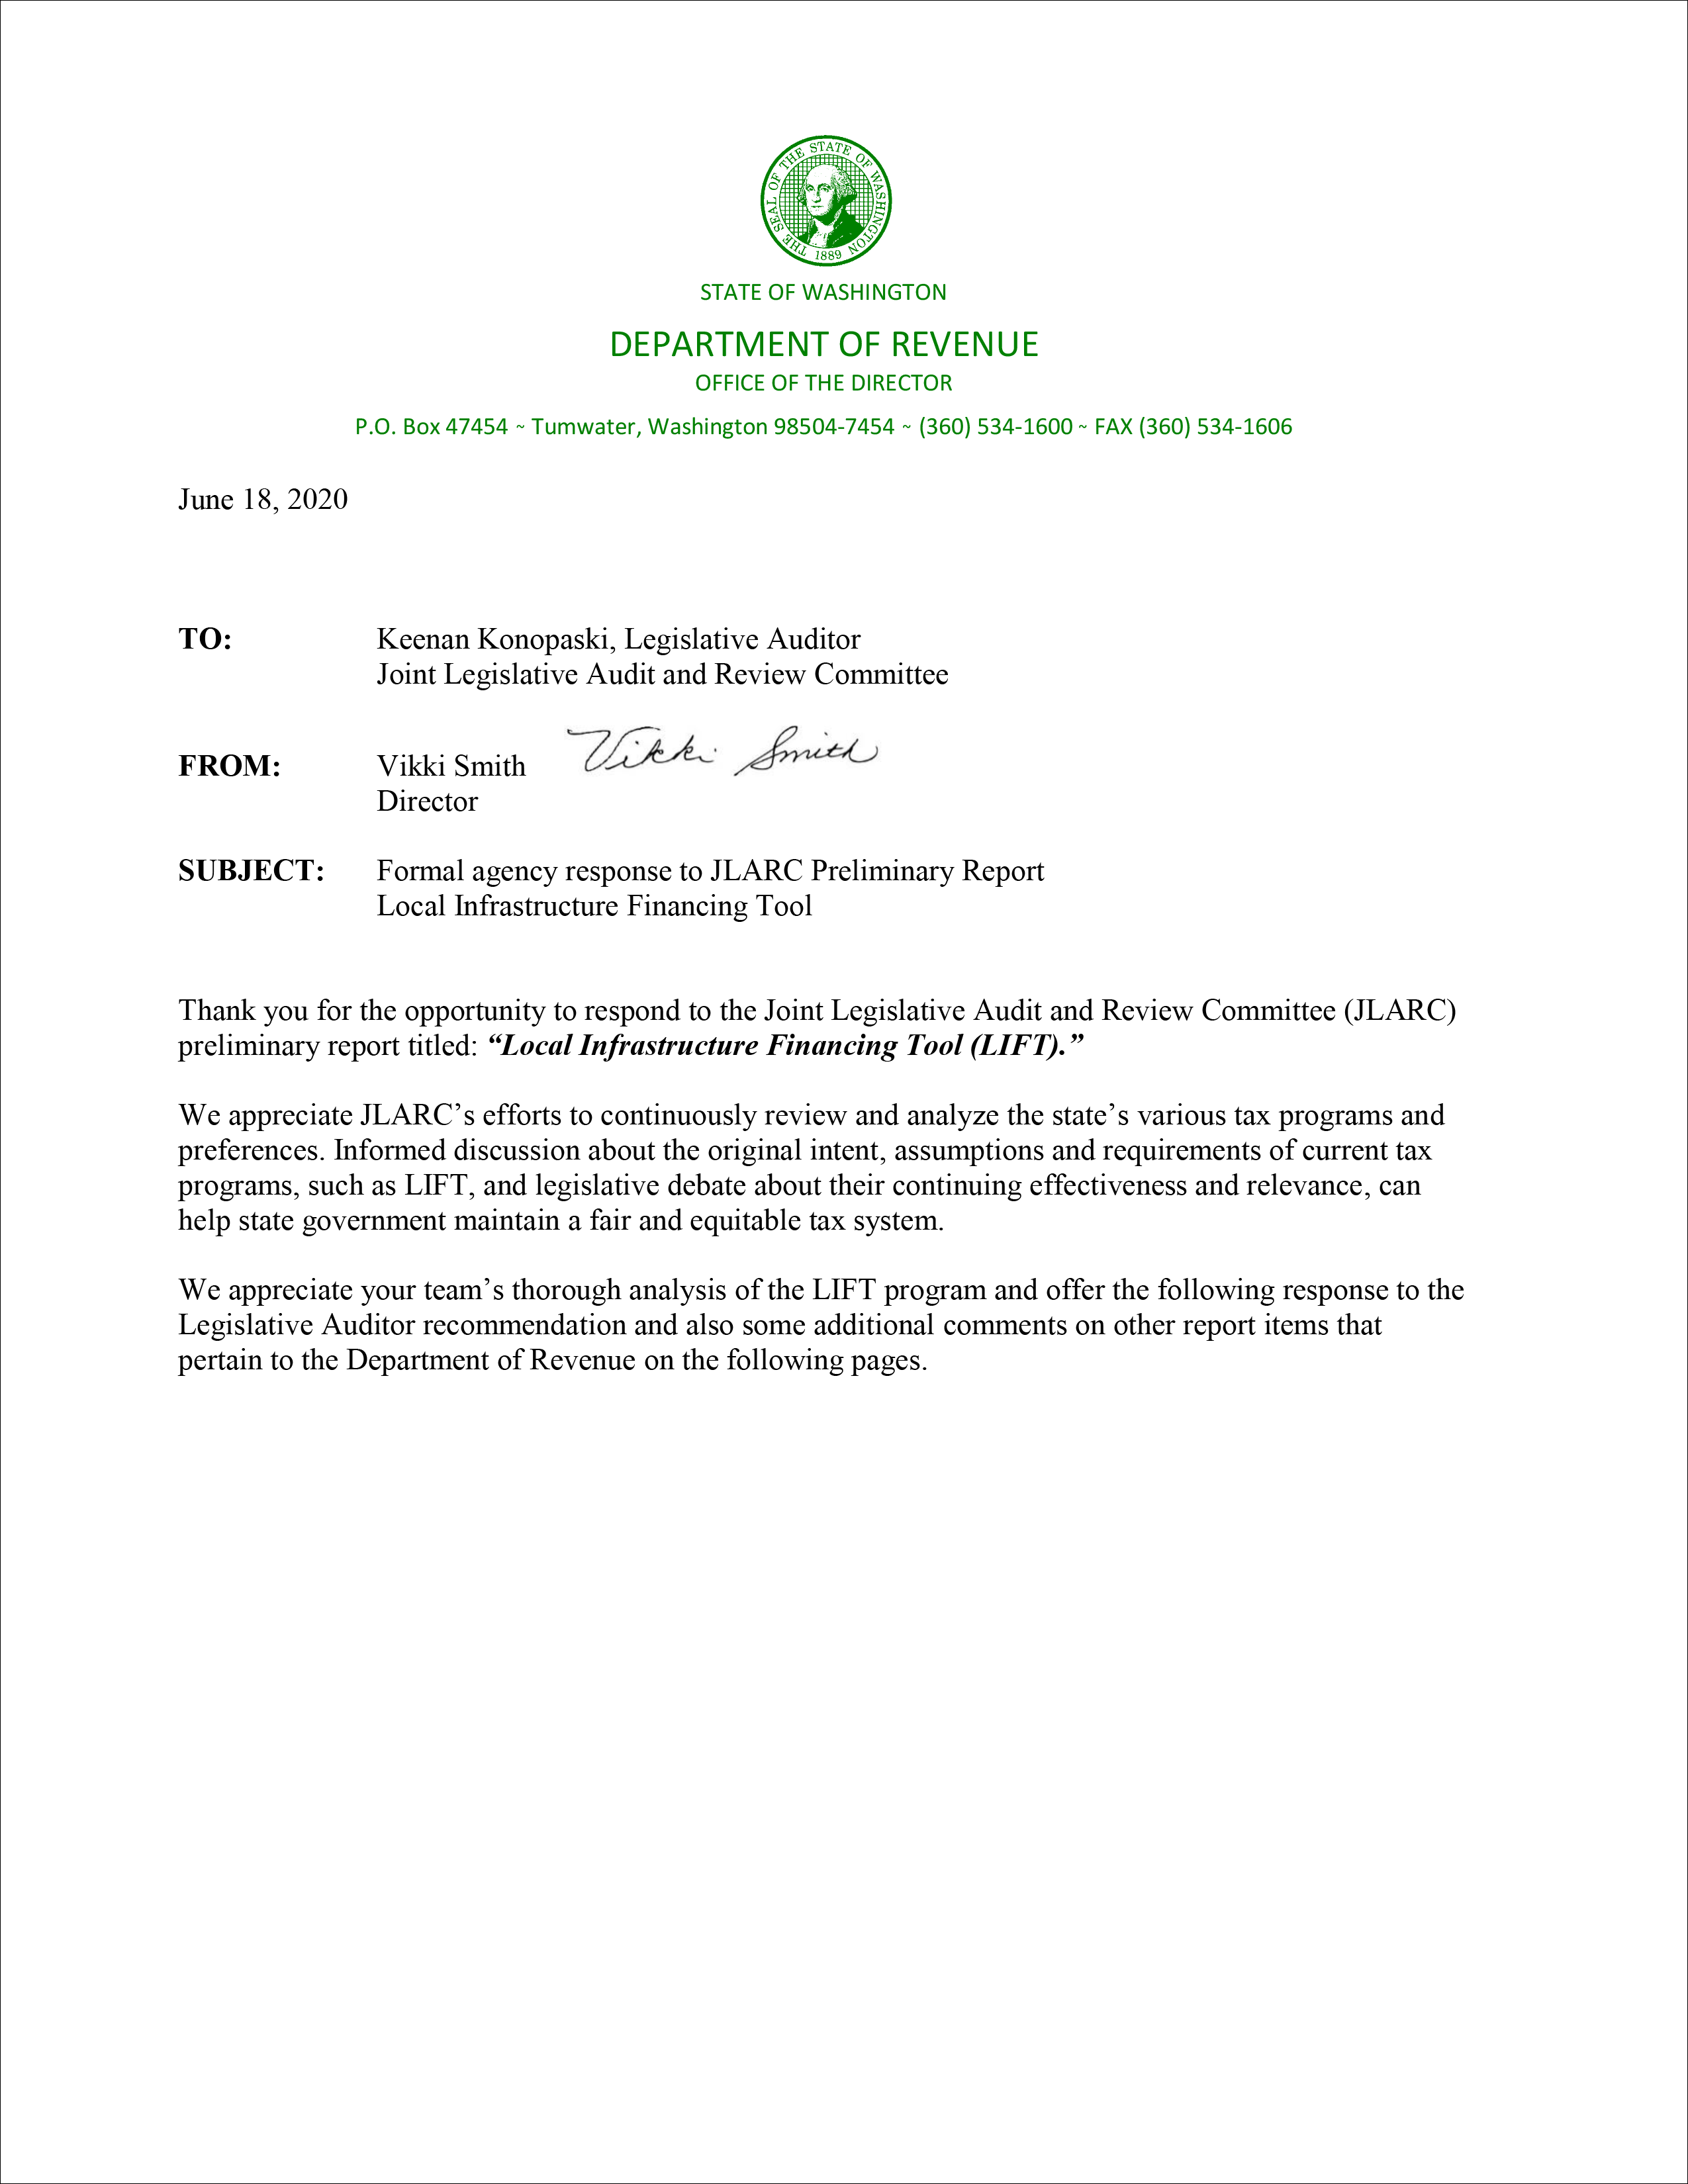 Page one of DOR's response